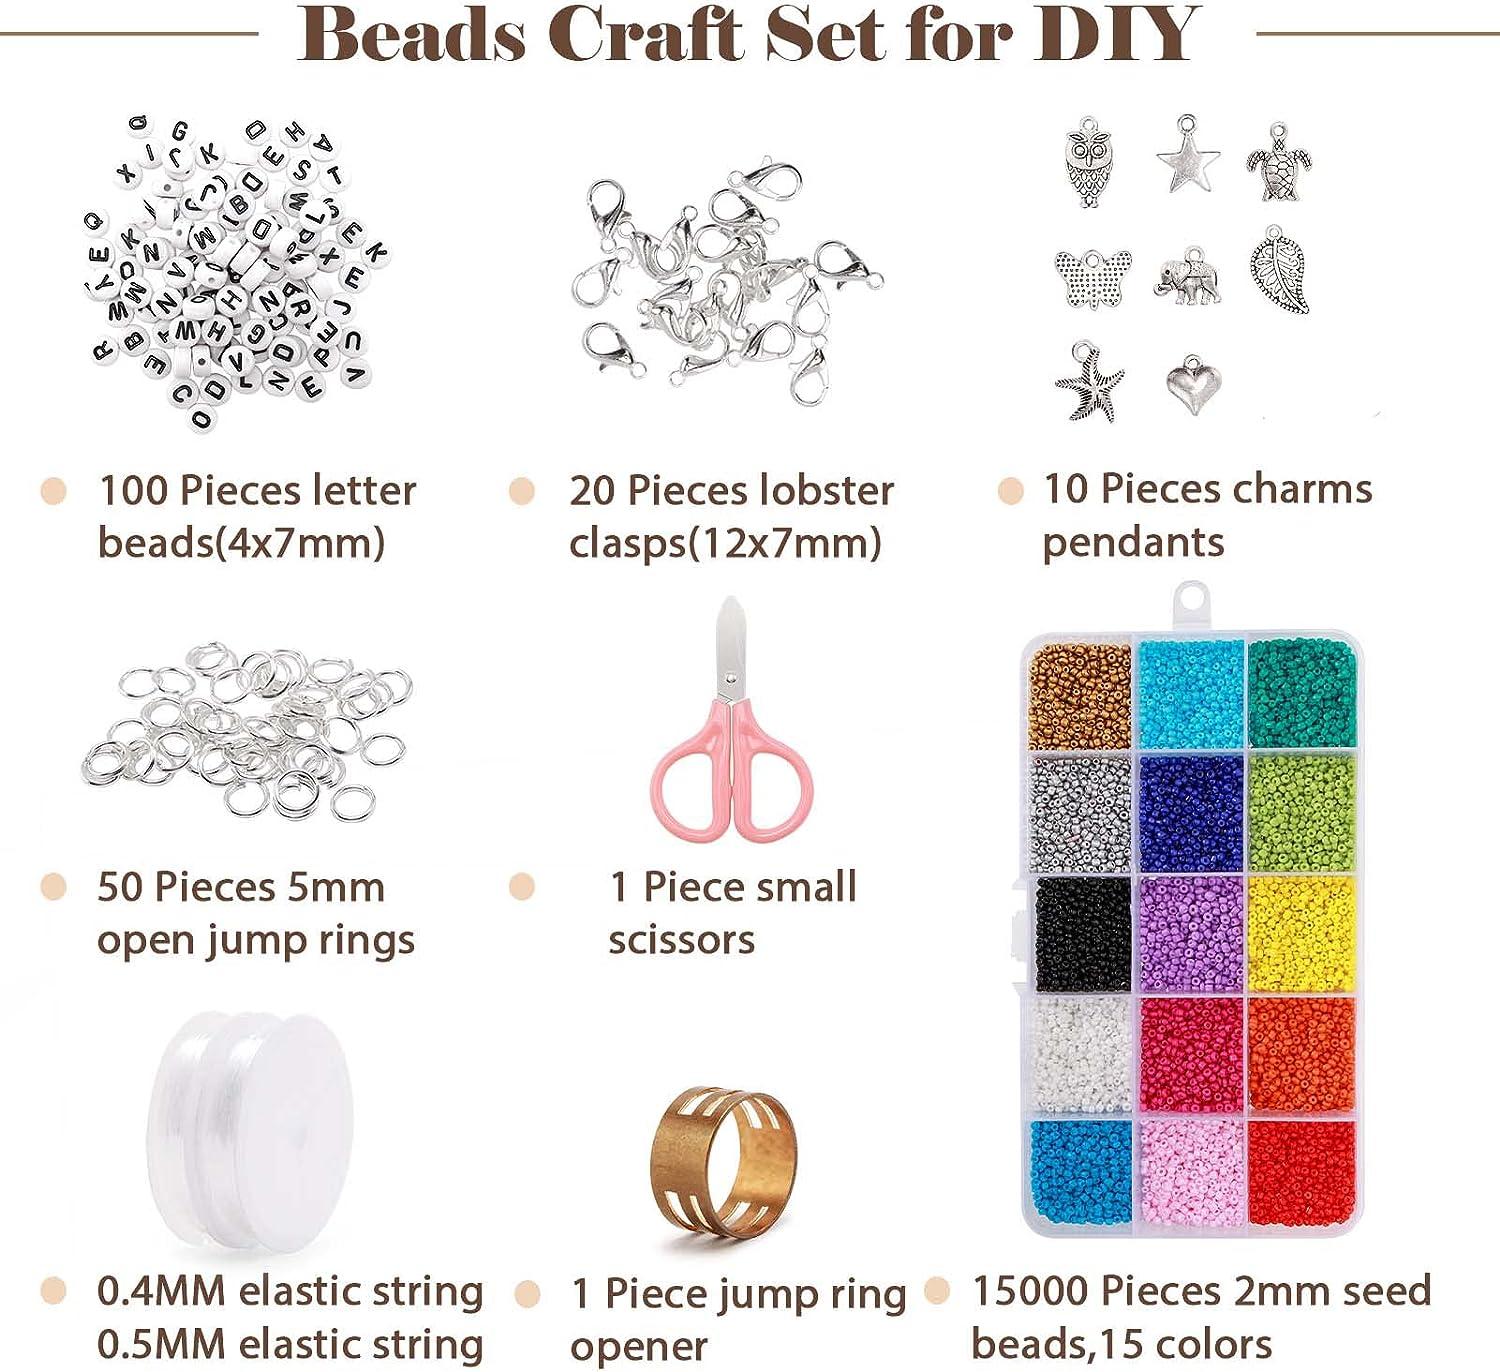 MAKE A WAIST BEAD W/ ME USING OPOUNT ELECTRIC BEAD SPINNER, DIY HOW TO  MAKE A WAIST BEAD